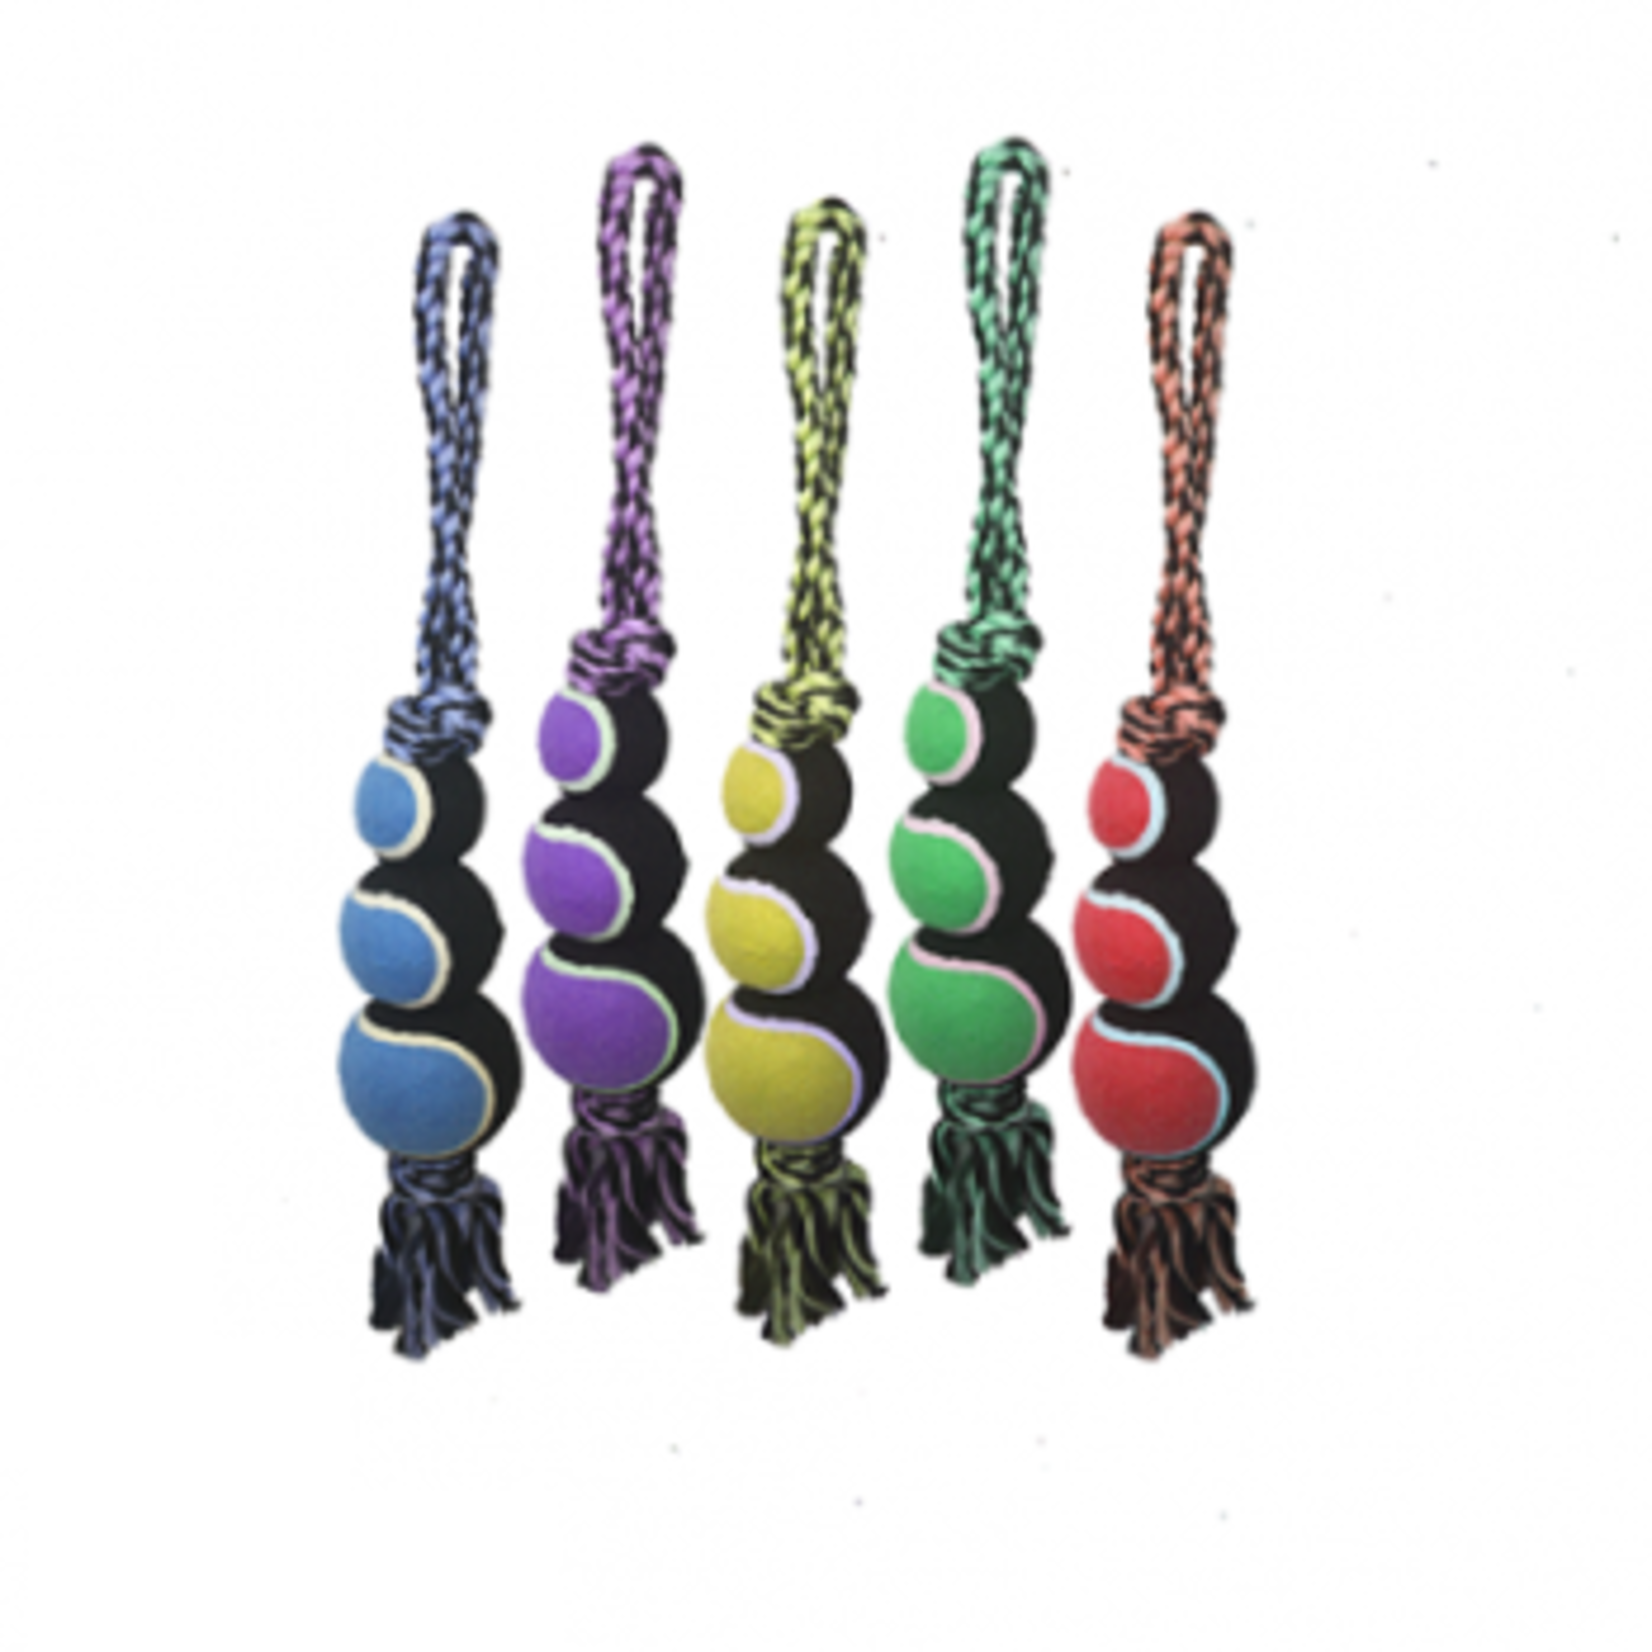 MultiPet Nuts for Knots - 2 Knot Rope Tugs - 3 Tennis Balls - Sold individually